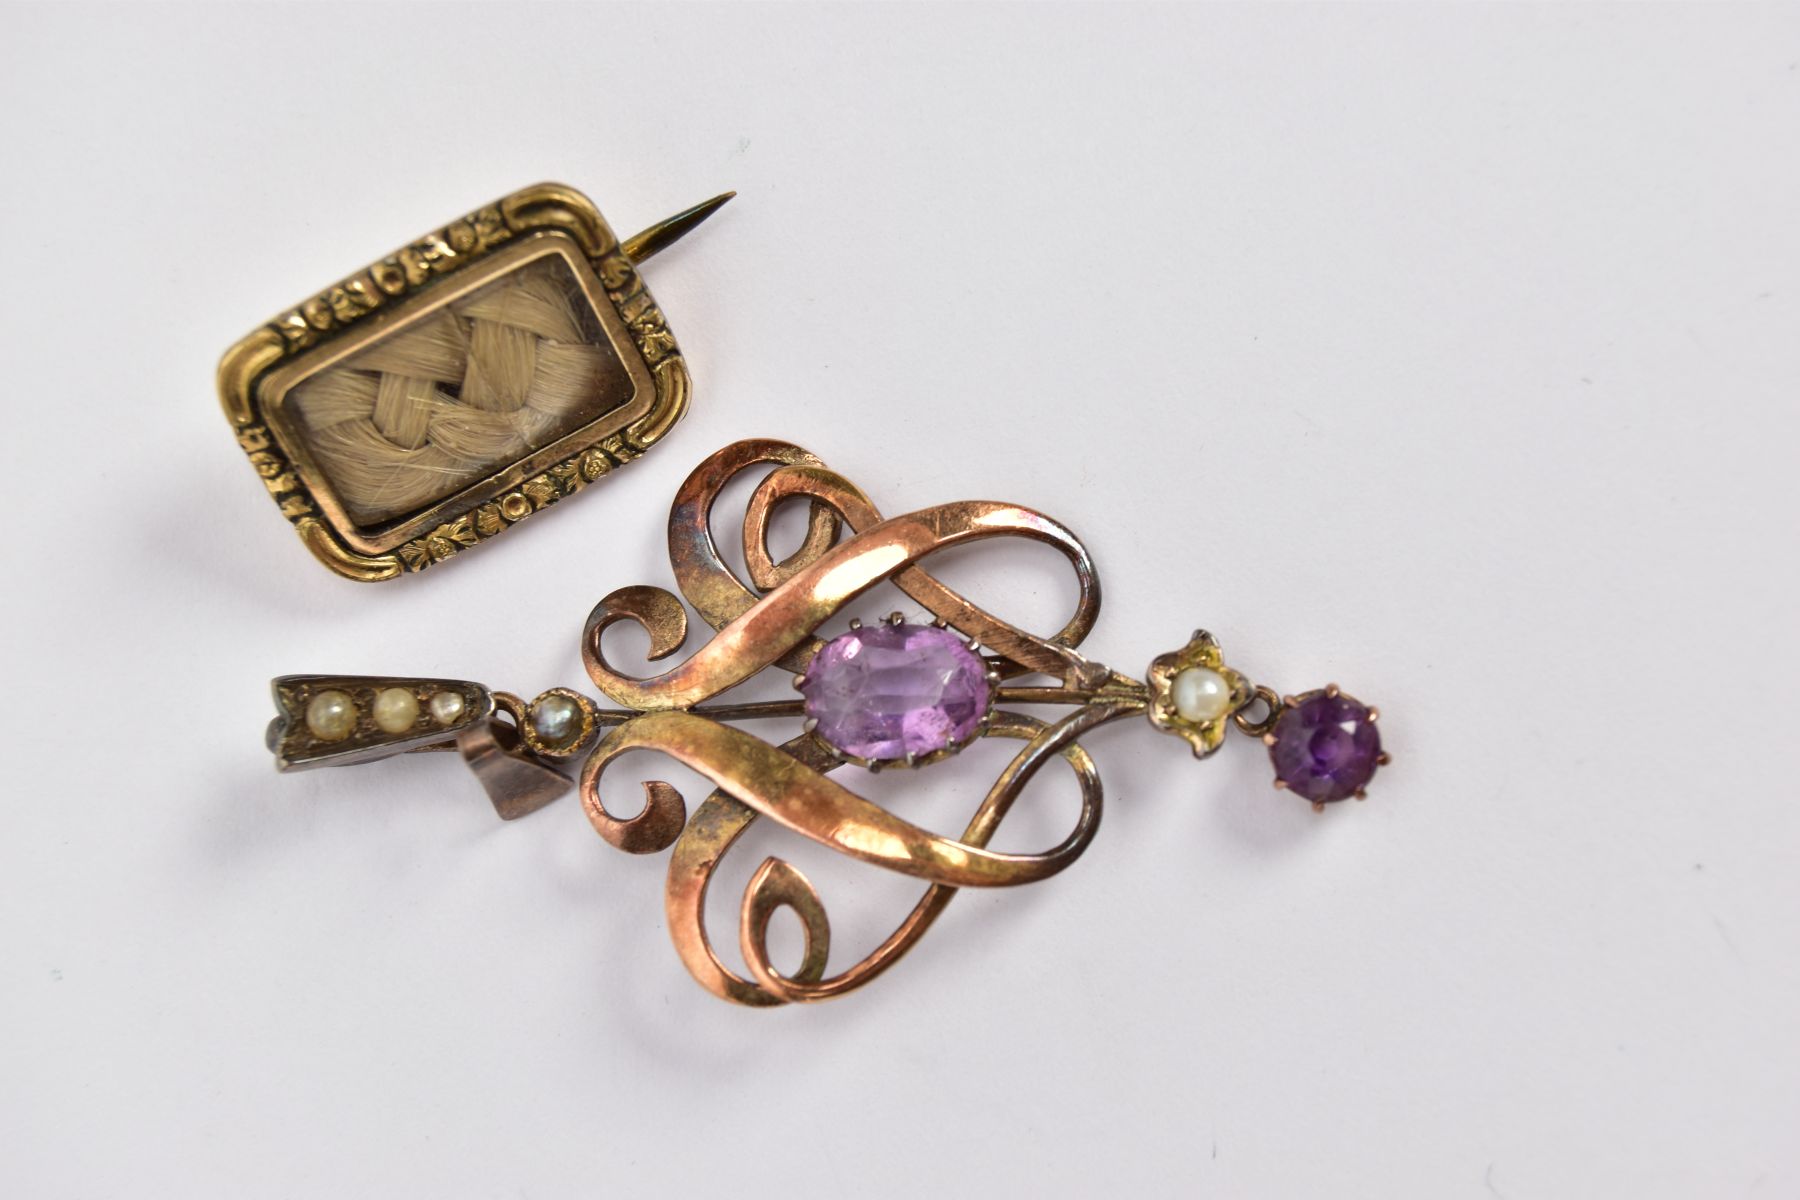 AN AMETHYST AND SPLIT PEARL YELLOW METAL PENDANT AND A WOVEN HAIR MEMORIAL YELLOW METAL BROOCH,